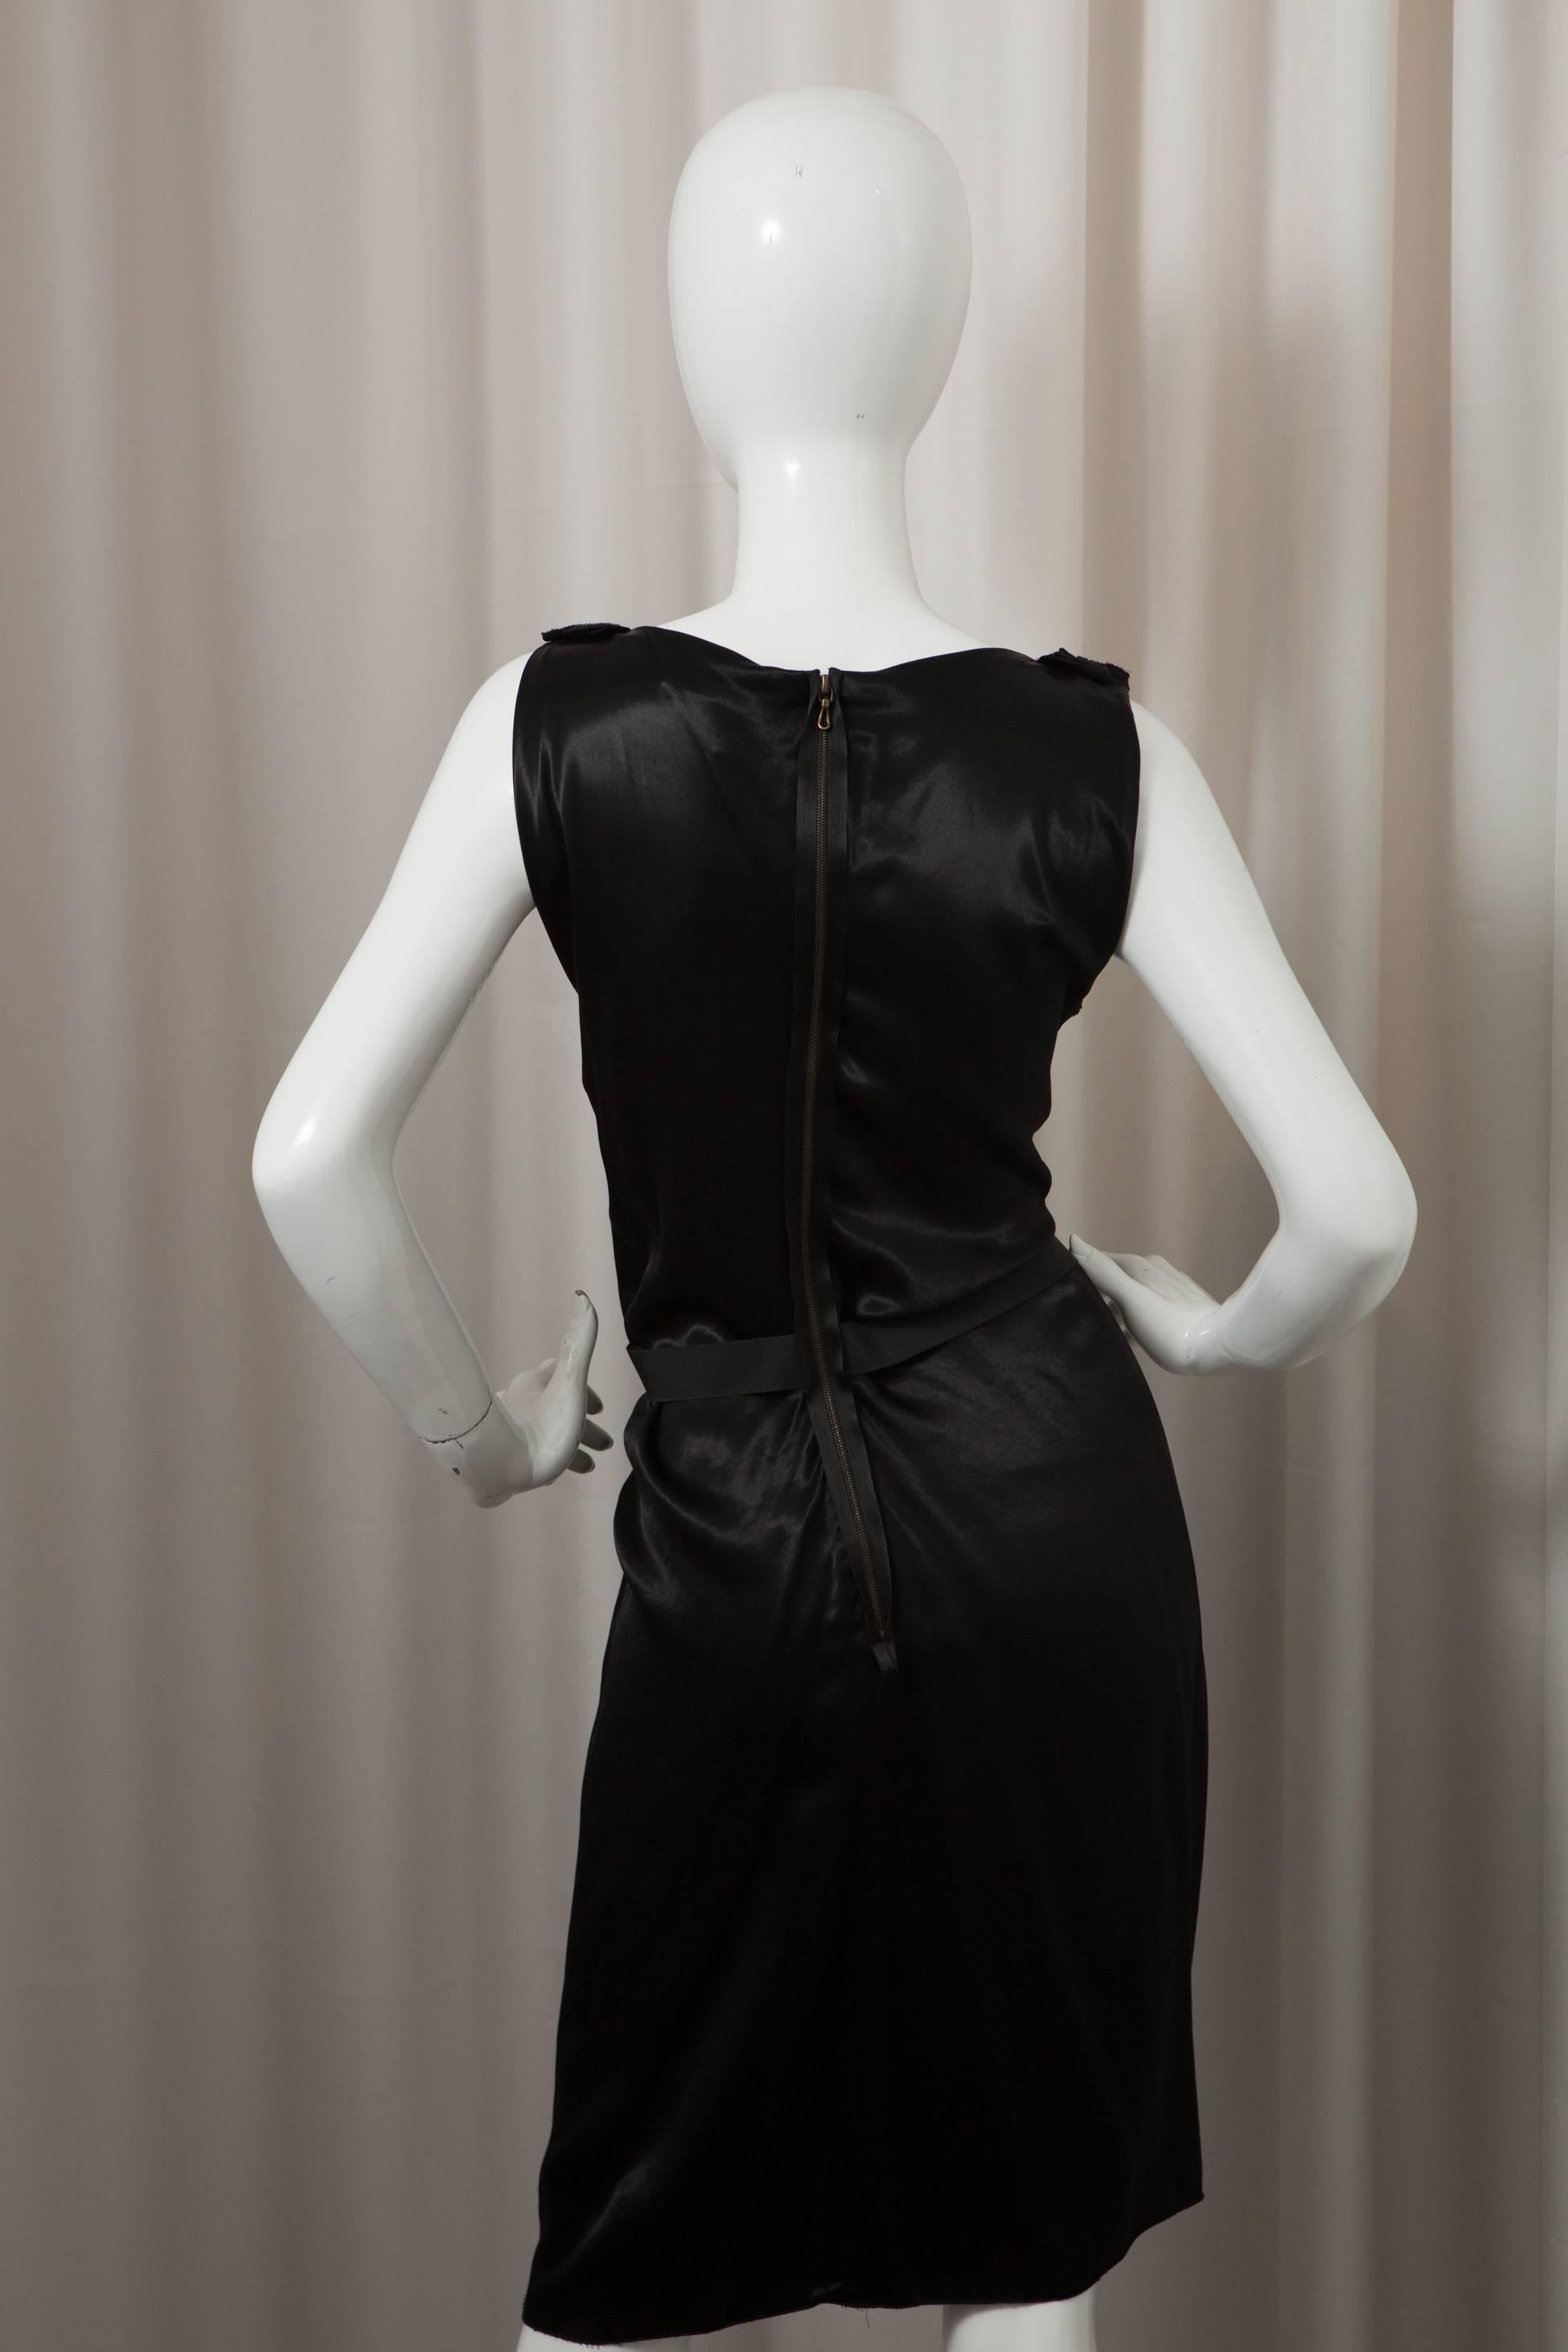 Black seep v-neck dress with elastic waist detail and exposed zipper back. 